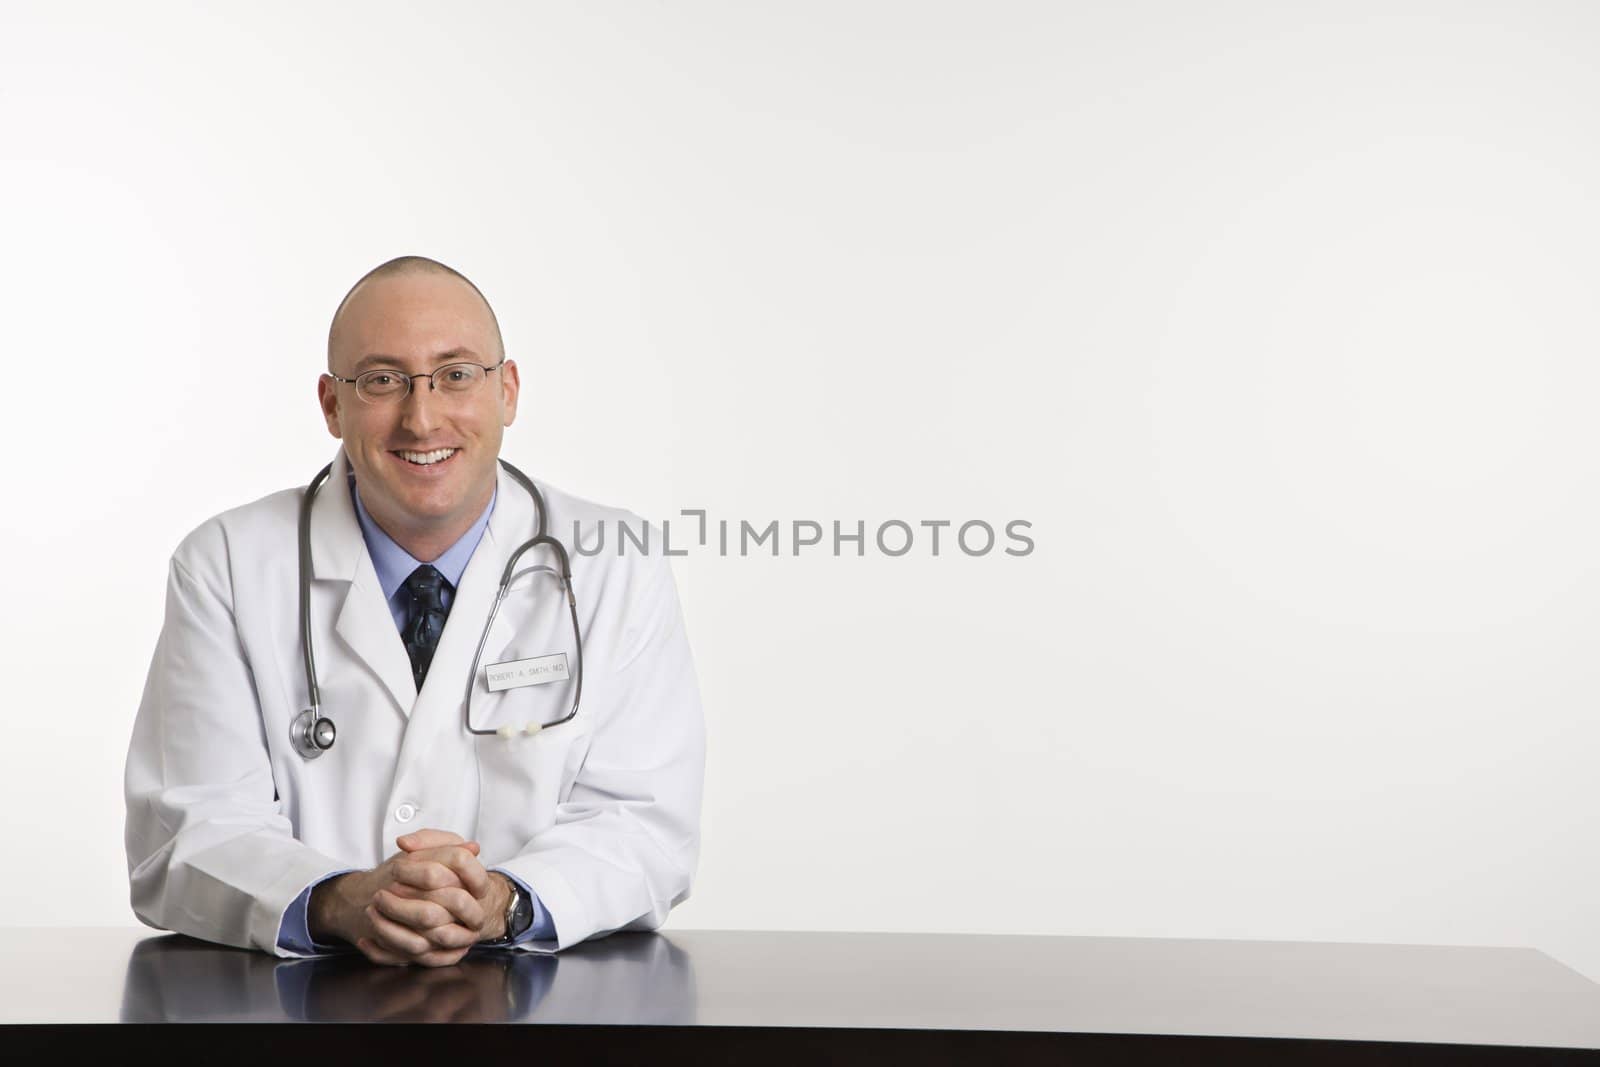 Caucasian mid adult male physician sitting at desk smiling.